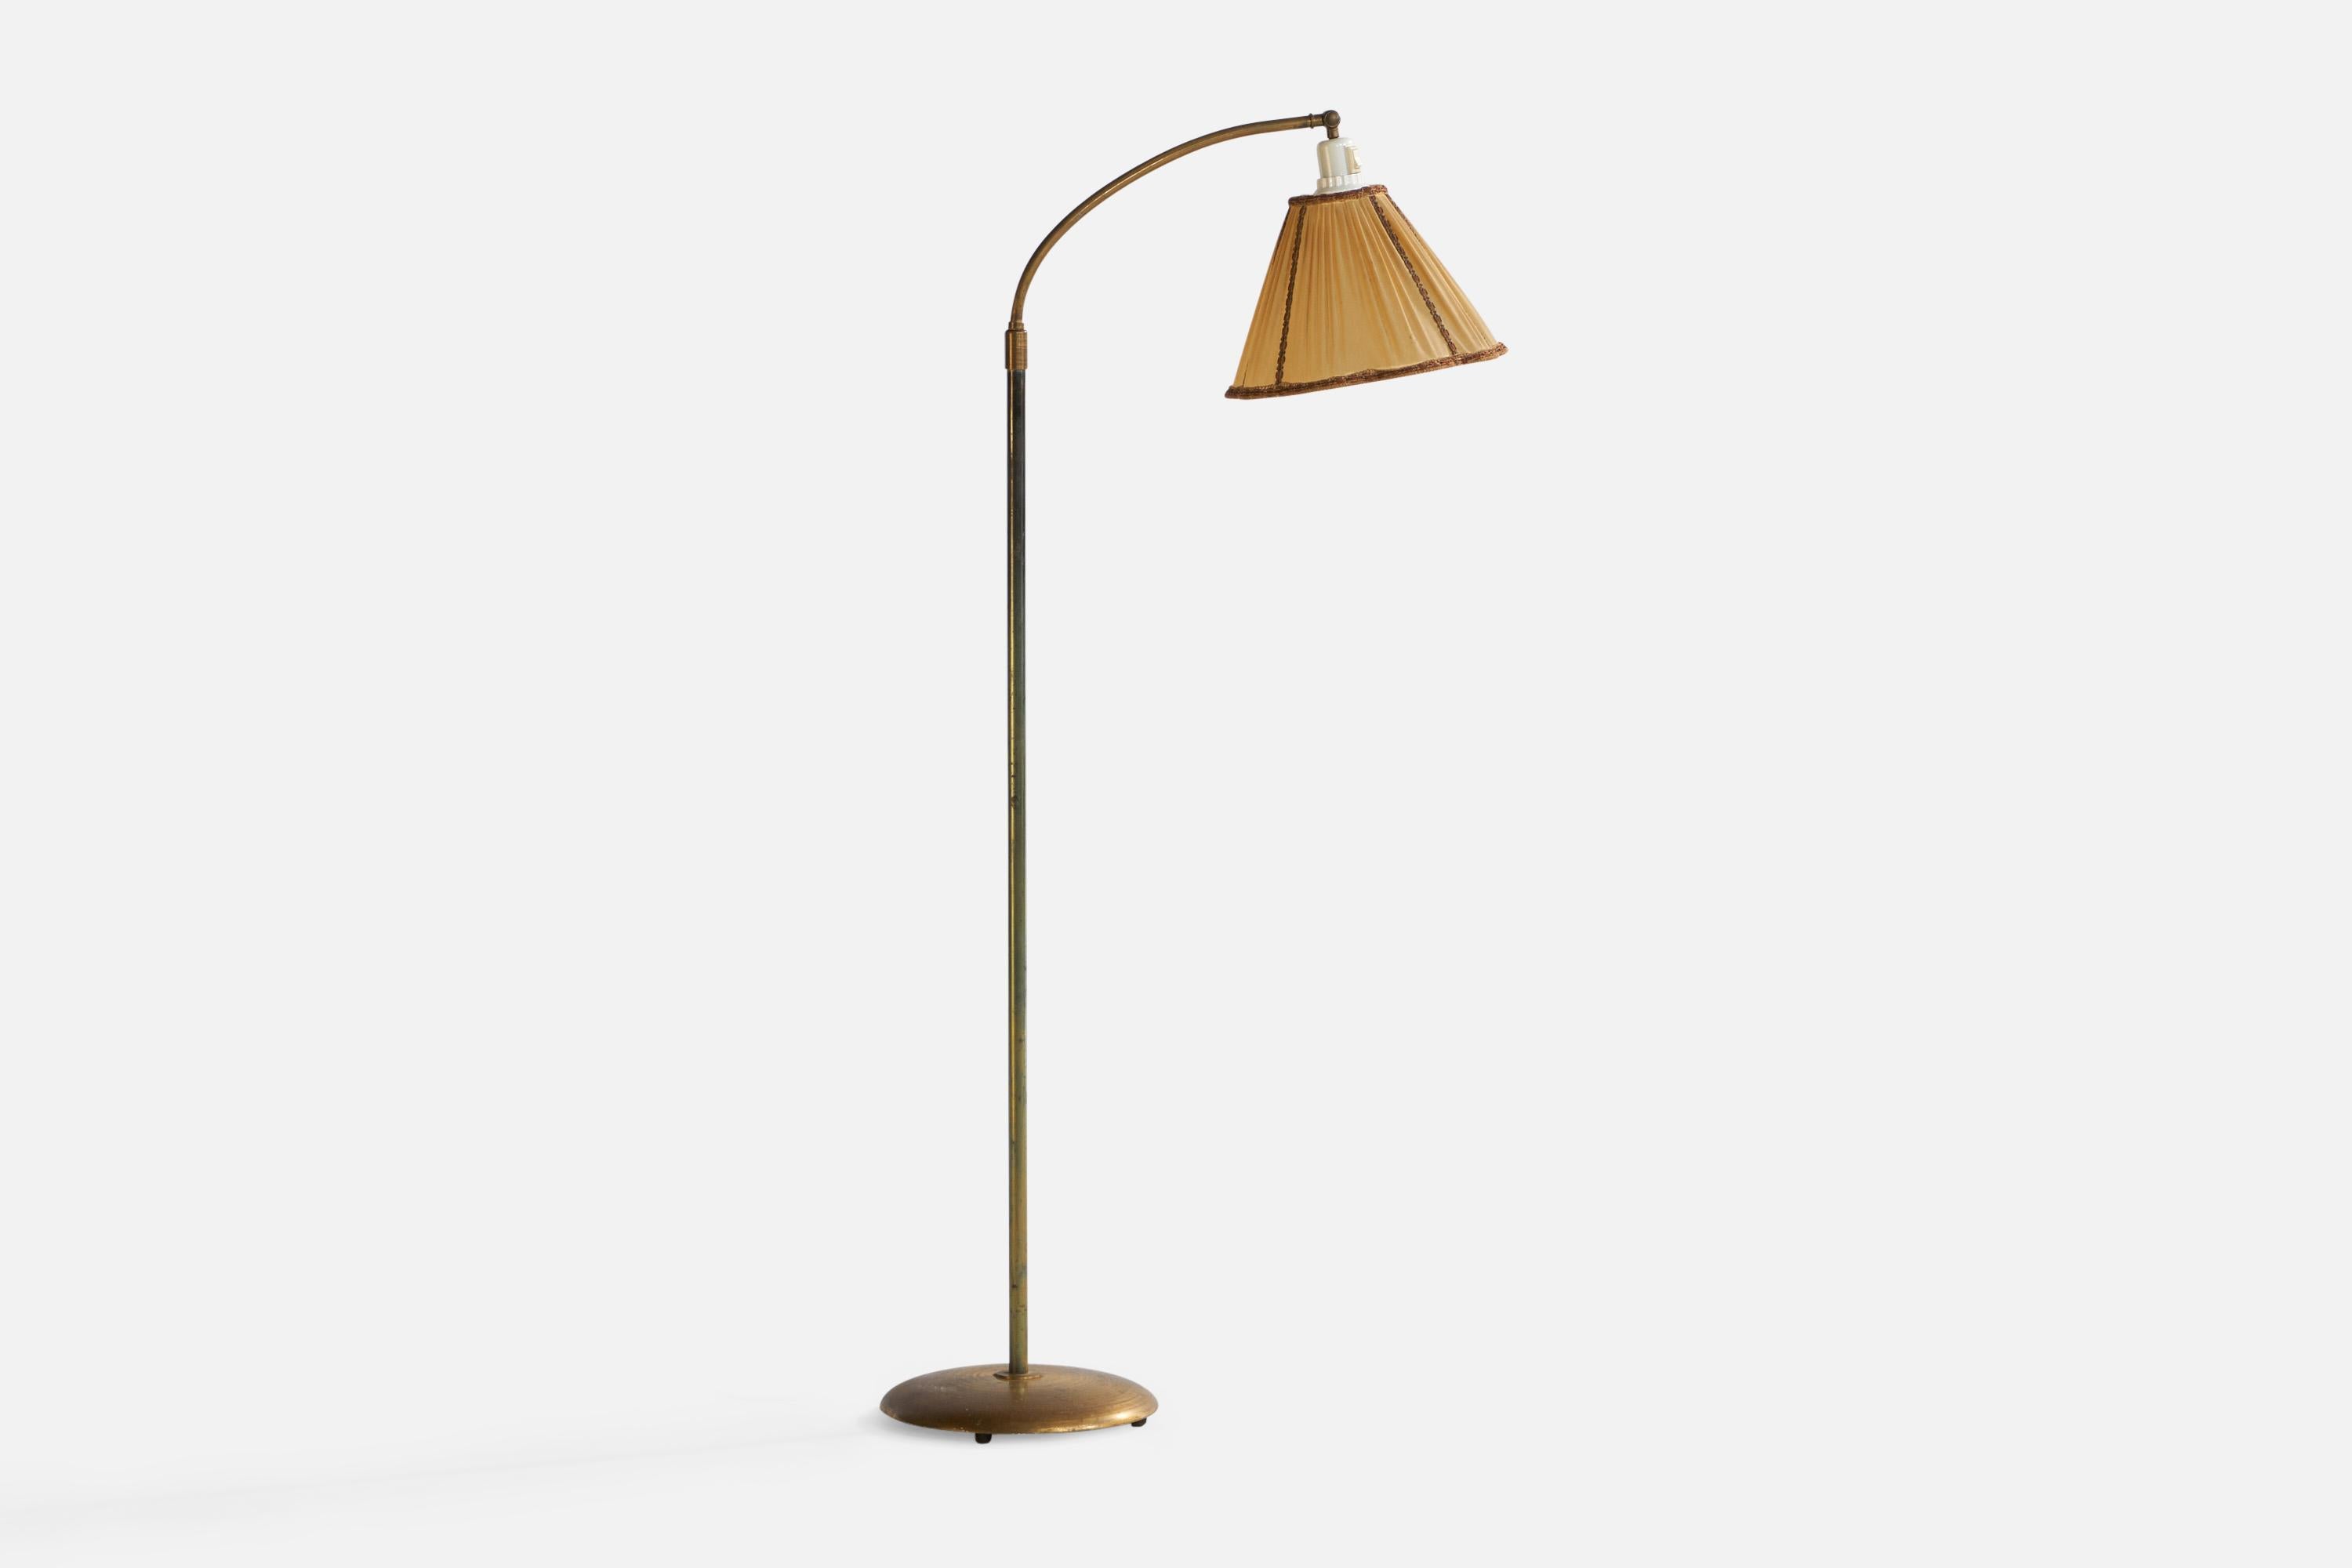 An adjustable brass and beige fabric floor lamp designed and produced in Sweden, 1930s.

Overall Dimensions (inches): 55.95” H x 10.65” W x 25.5” Depth. Stated dimensions include shade.
Dimensions vary based on position of light. Height and angle